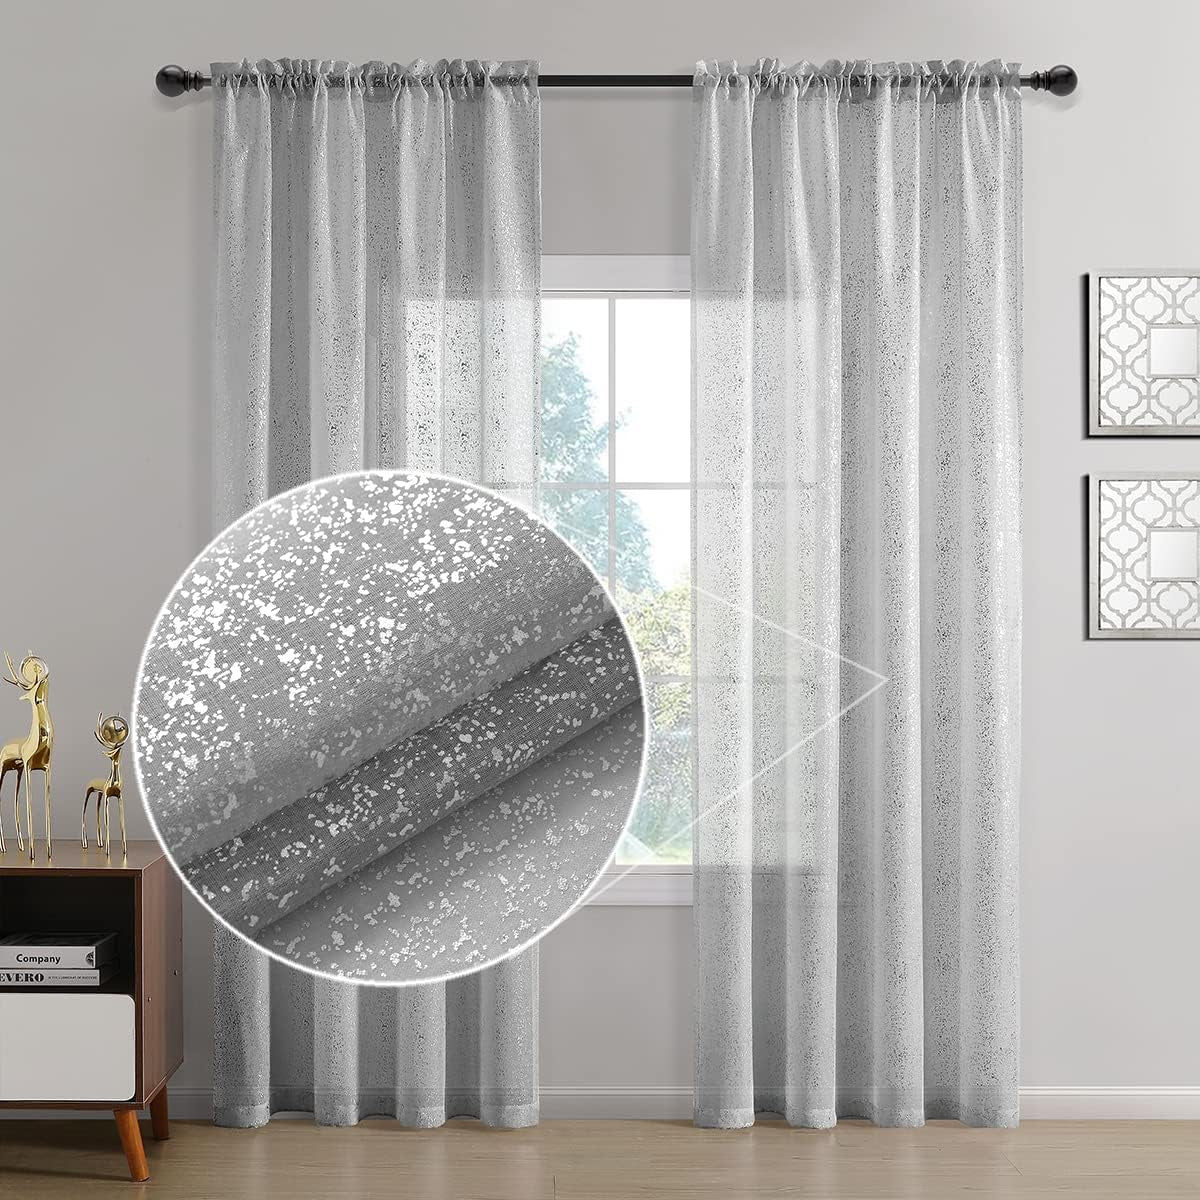 Silver Sheer Curtains 84 Inch Long - Chic Sparkle Curtains for Living Room, Rod Pocket Glitter Sheer Curtains for Windows Privacy Silver Grey Sheer Panels, 52 X 84 Inch, 2 Panels, Silver Gray  TERLYTEX   